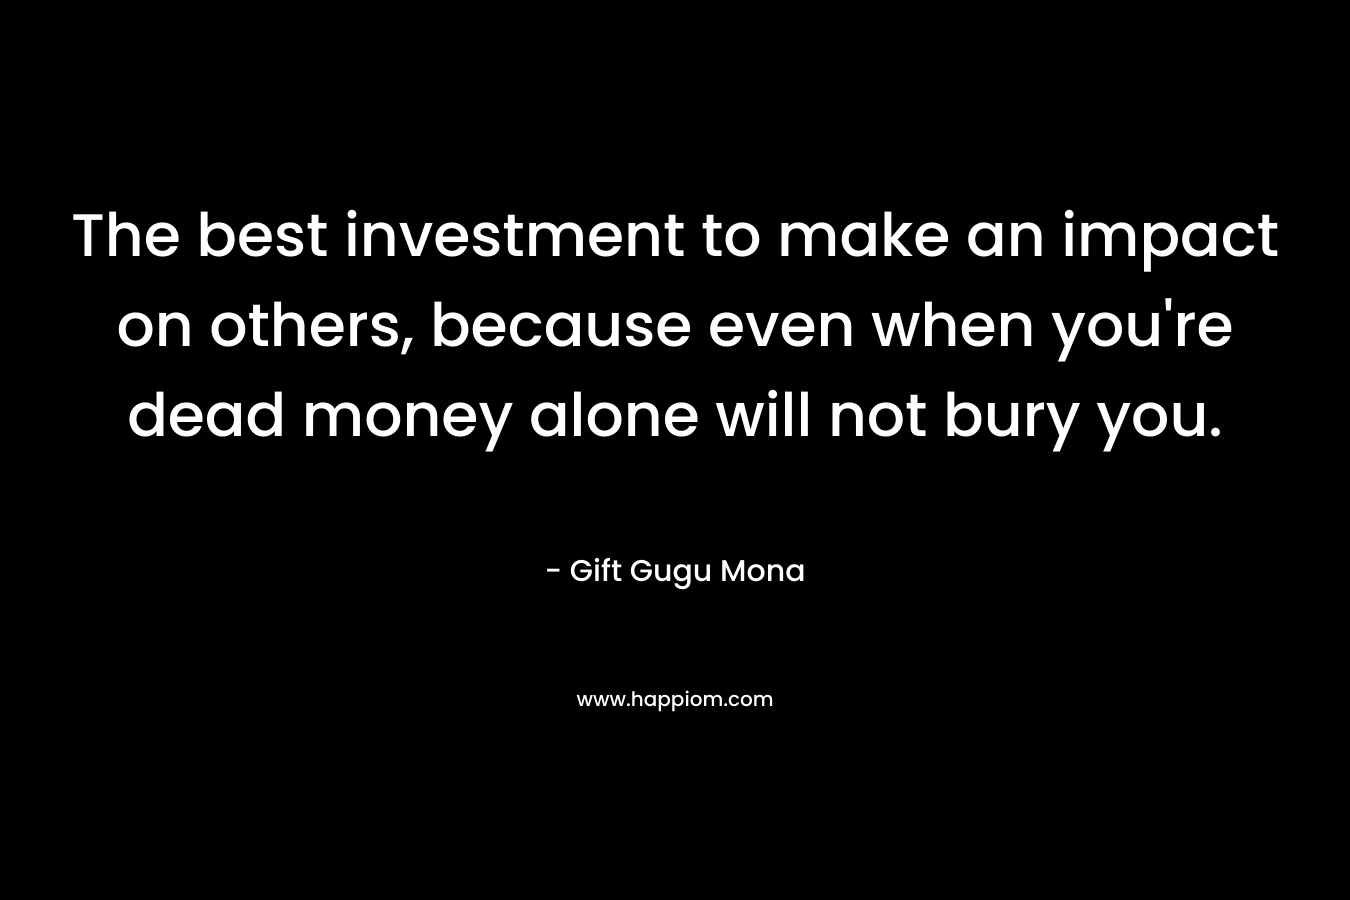 The best investment to make an impact on others, because even when you're dead money alone will not bury you.